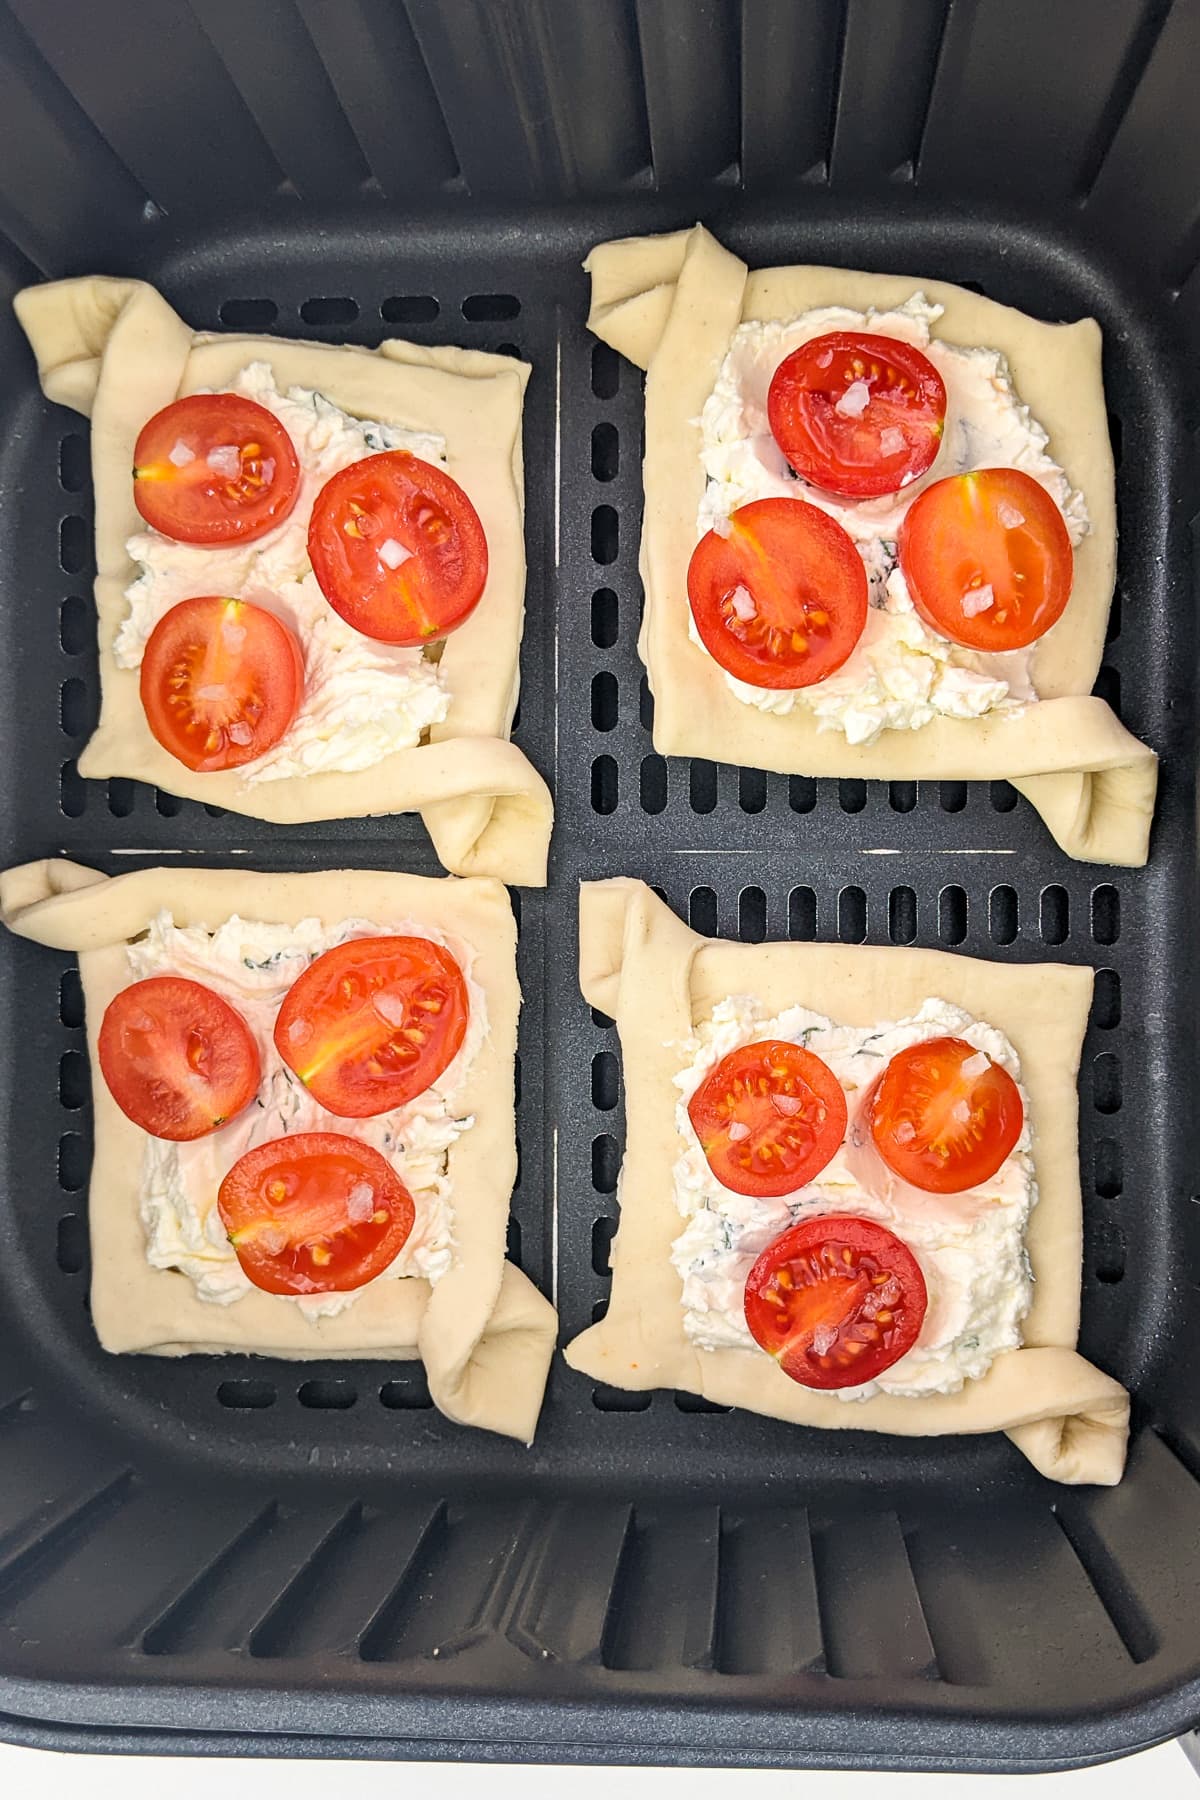 Top view of air fryer basket 4 tomato tartlets.